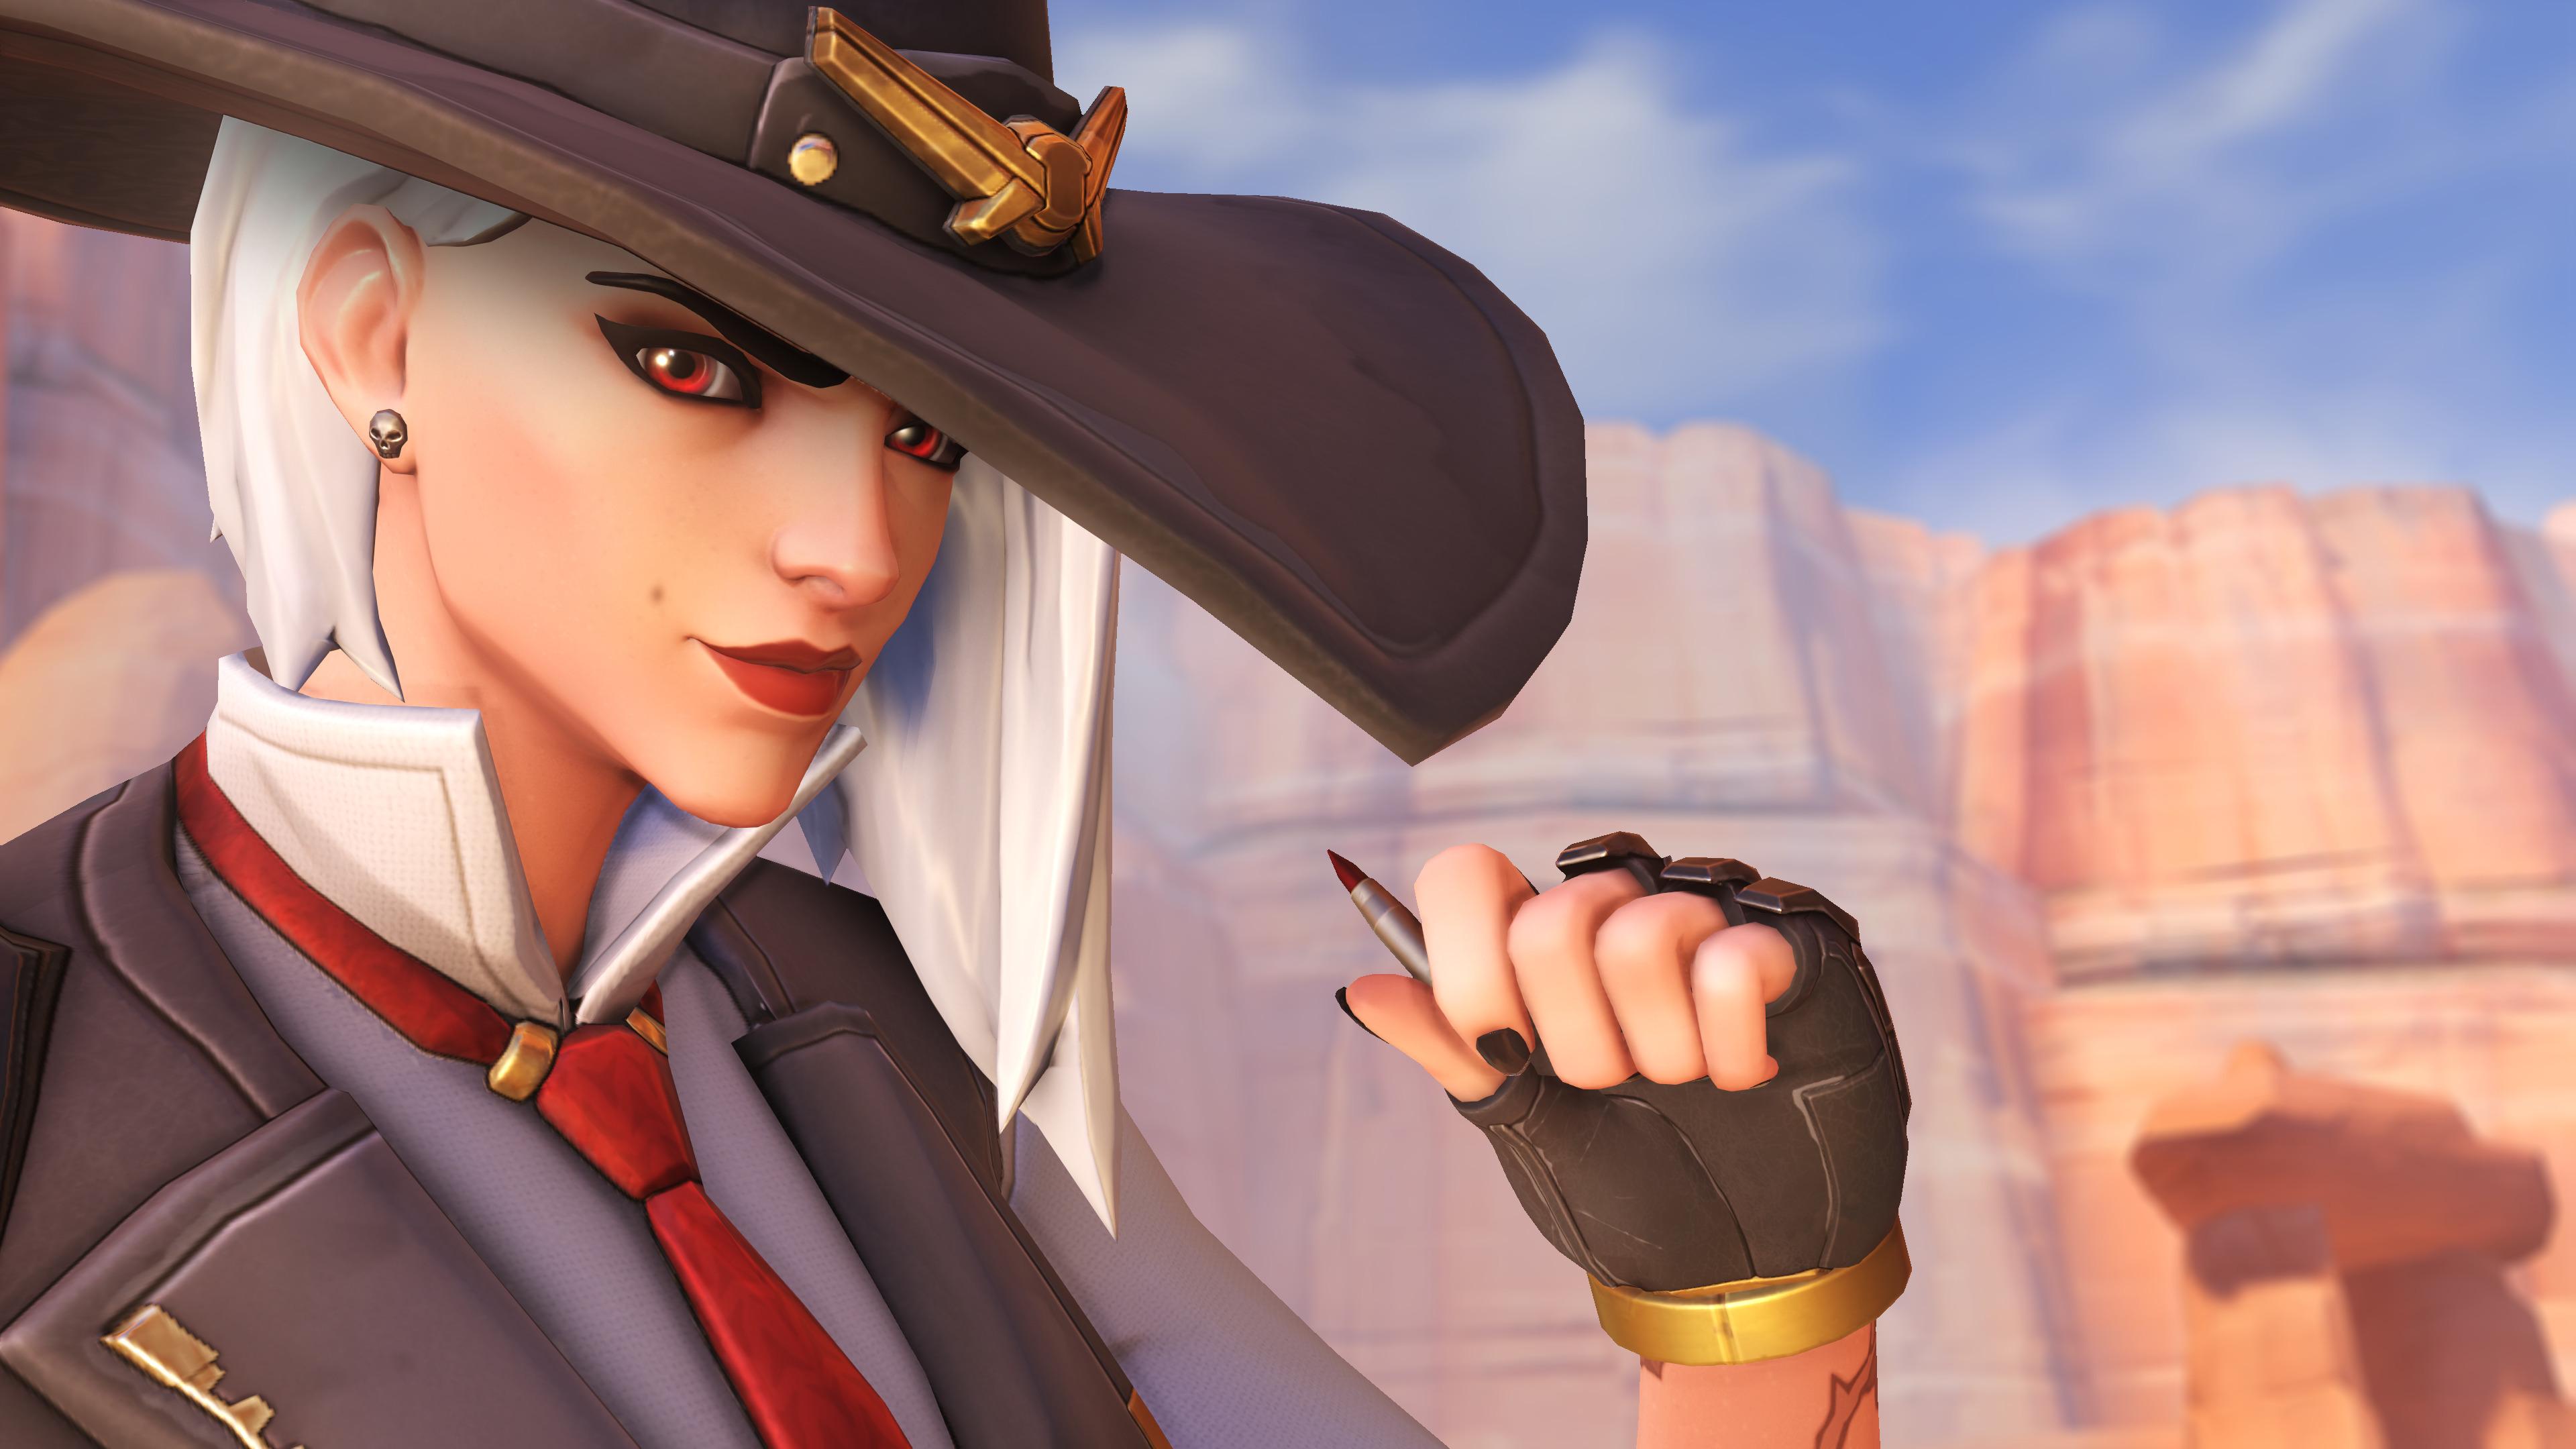 Ashe Overwatch 4k, HD Games, 4k Wallpapers, Image, Backgrounds